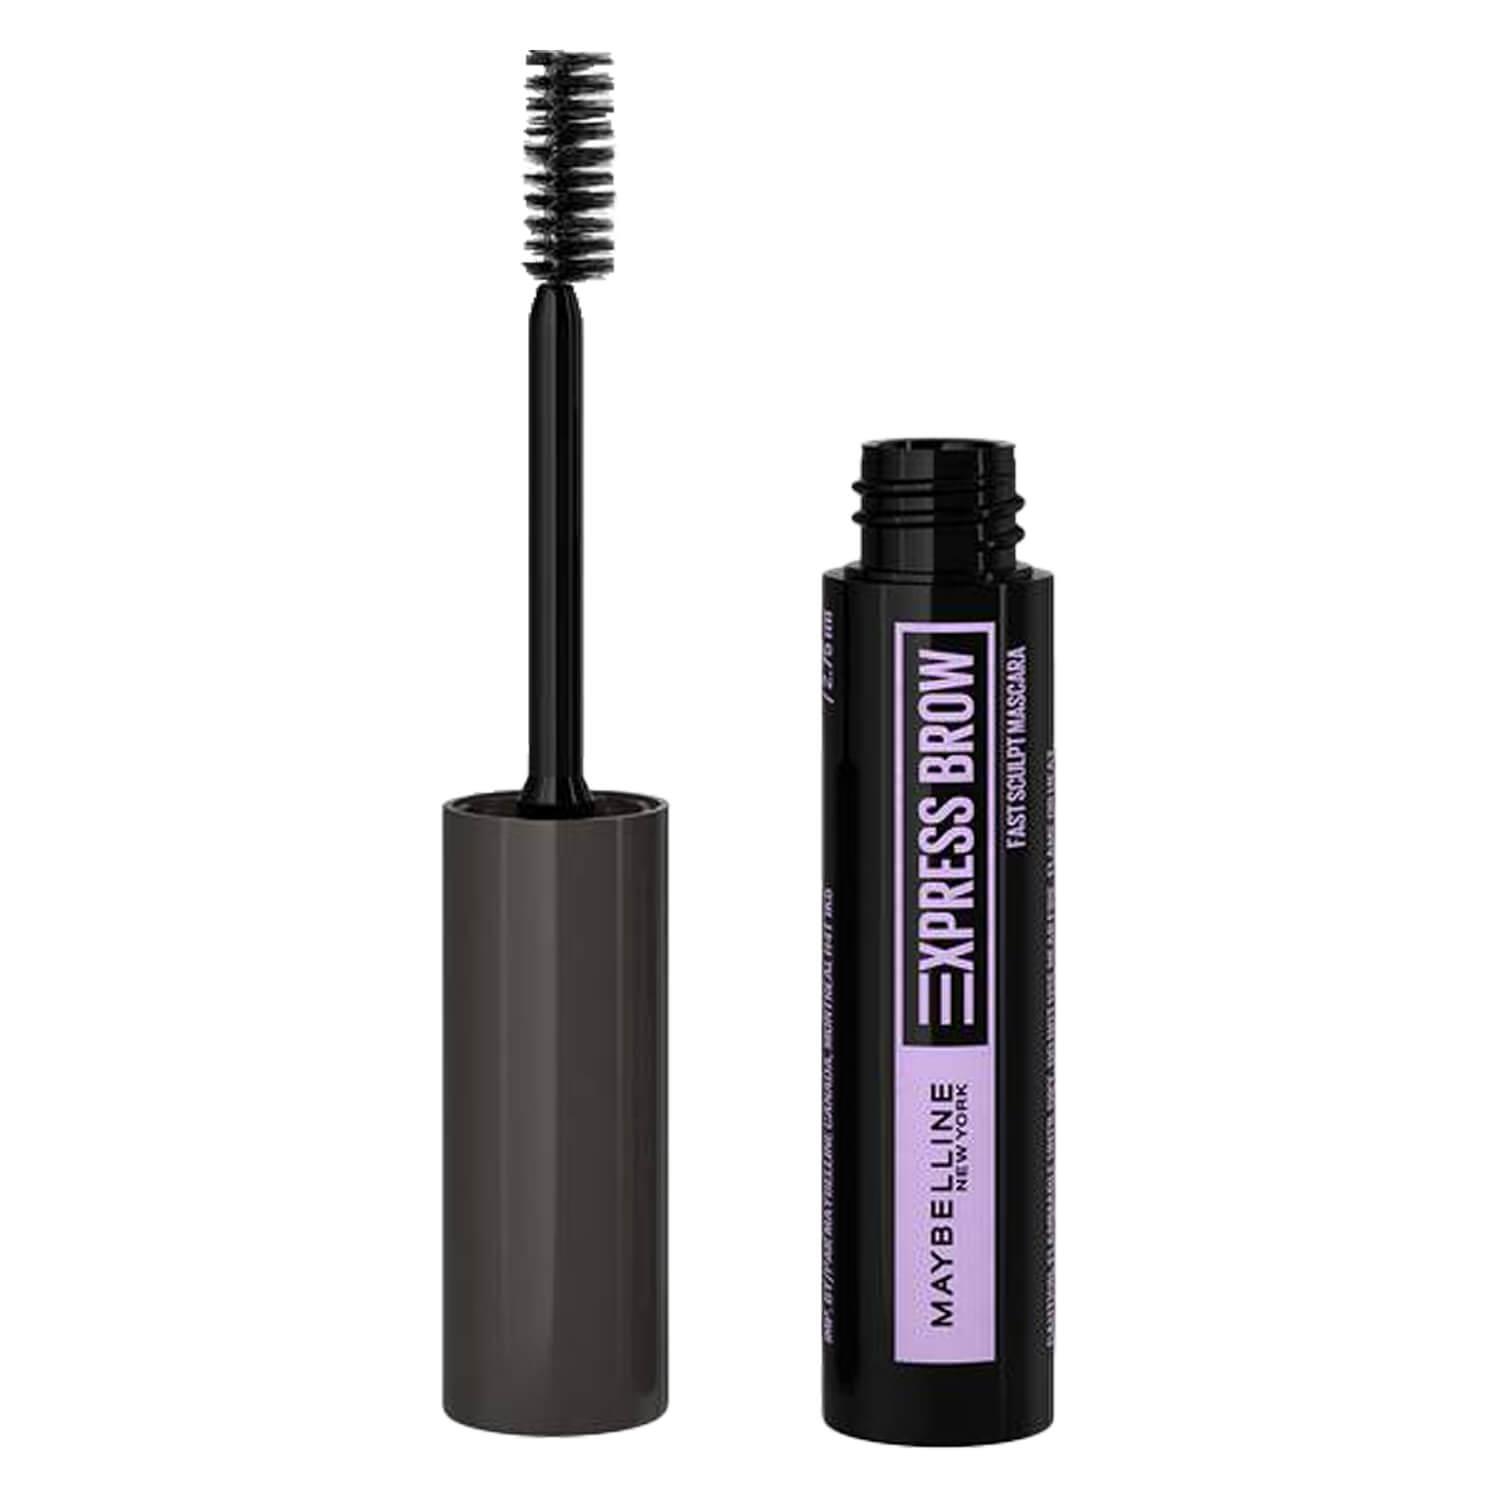 Maybelline NY Brows - Express Brow Fast Sculpt Mascara 06 Deep Brown